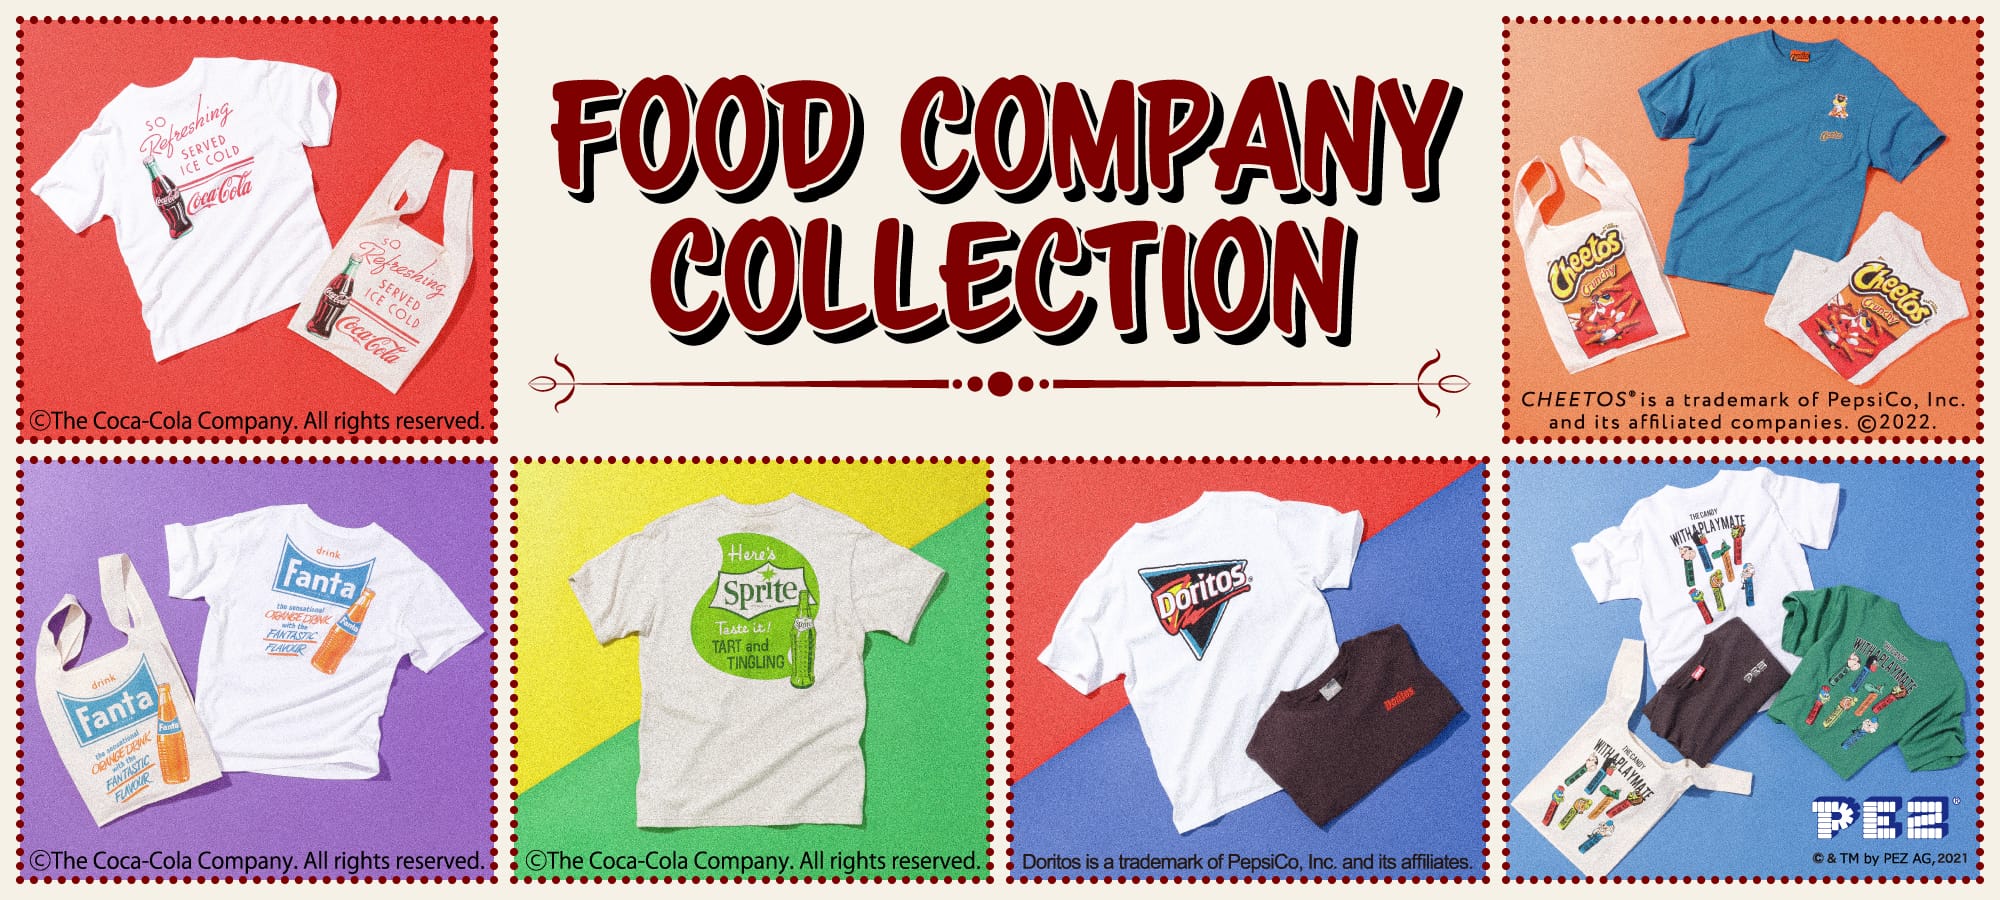 FOOD COMPANY COLLECTION